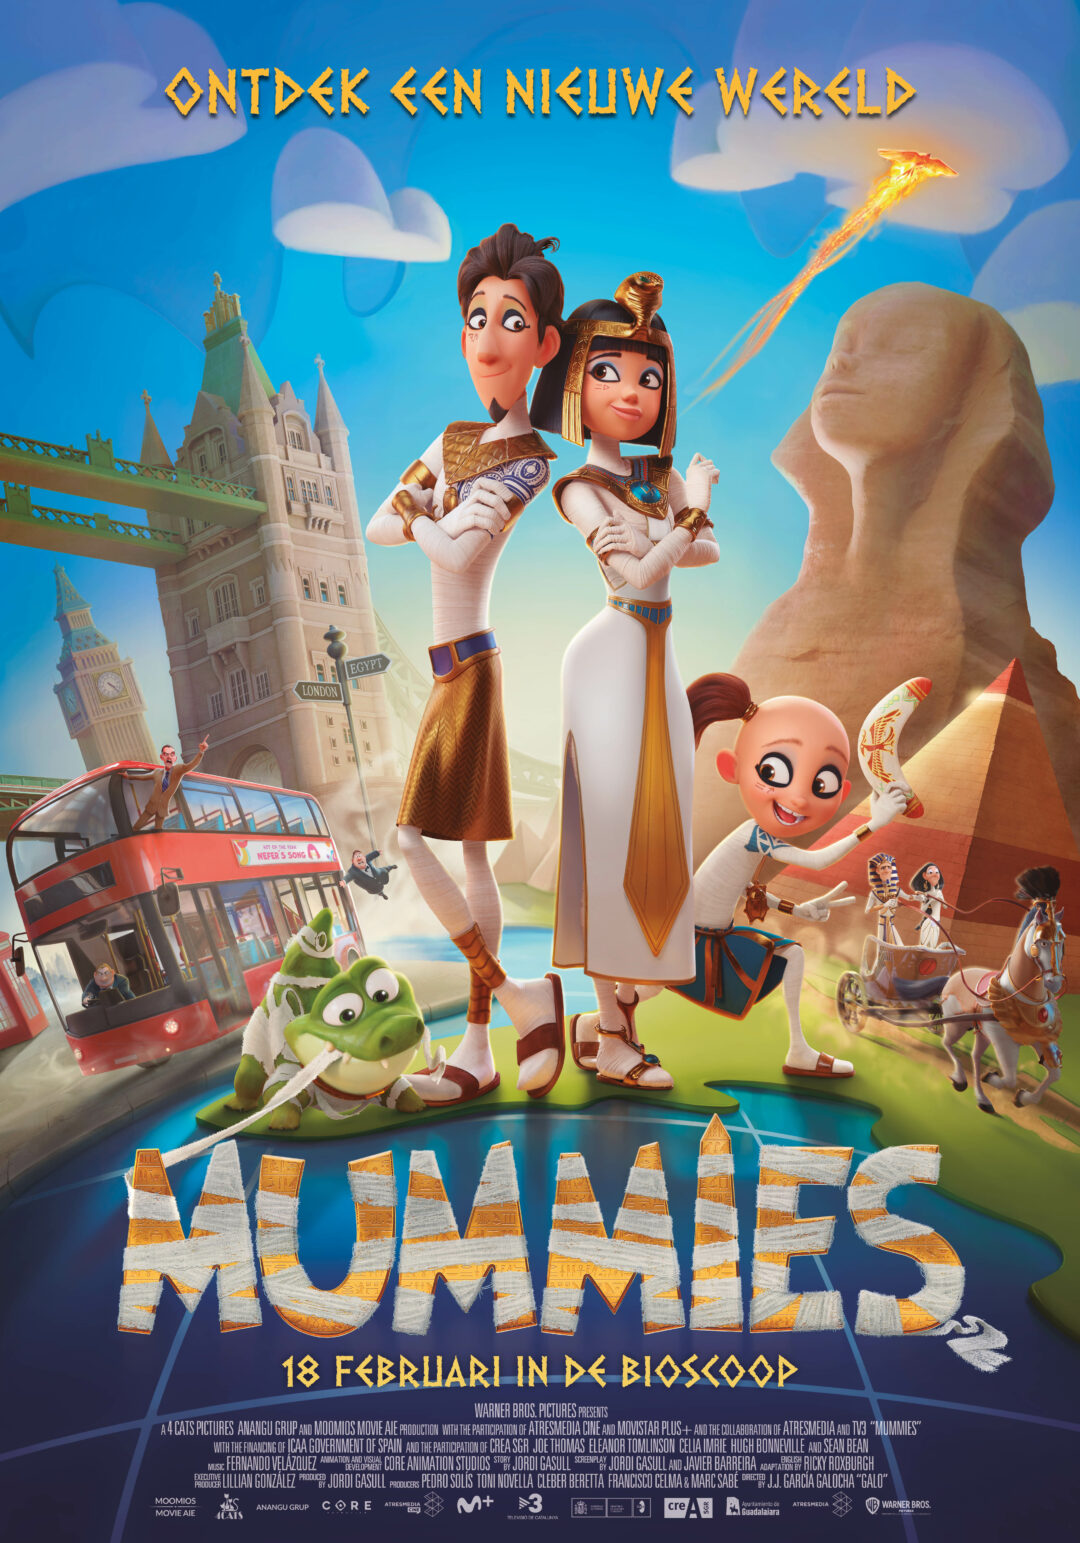 Mummies_ps_1_jpg_sd-high_Copyright-4-Cats-Pictures-SL-Anagu-Grup-SLA-Moomios-Movie-AIE-2021-All-Rights-Reserved-Photo-Credit-Courtesy-of-Warner-Bros-Pictures.jpg